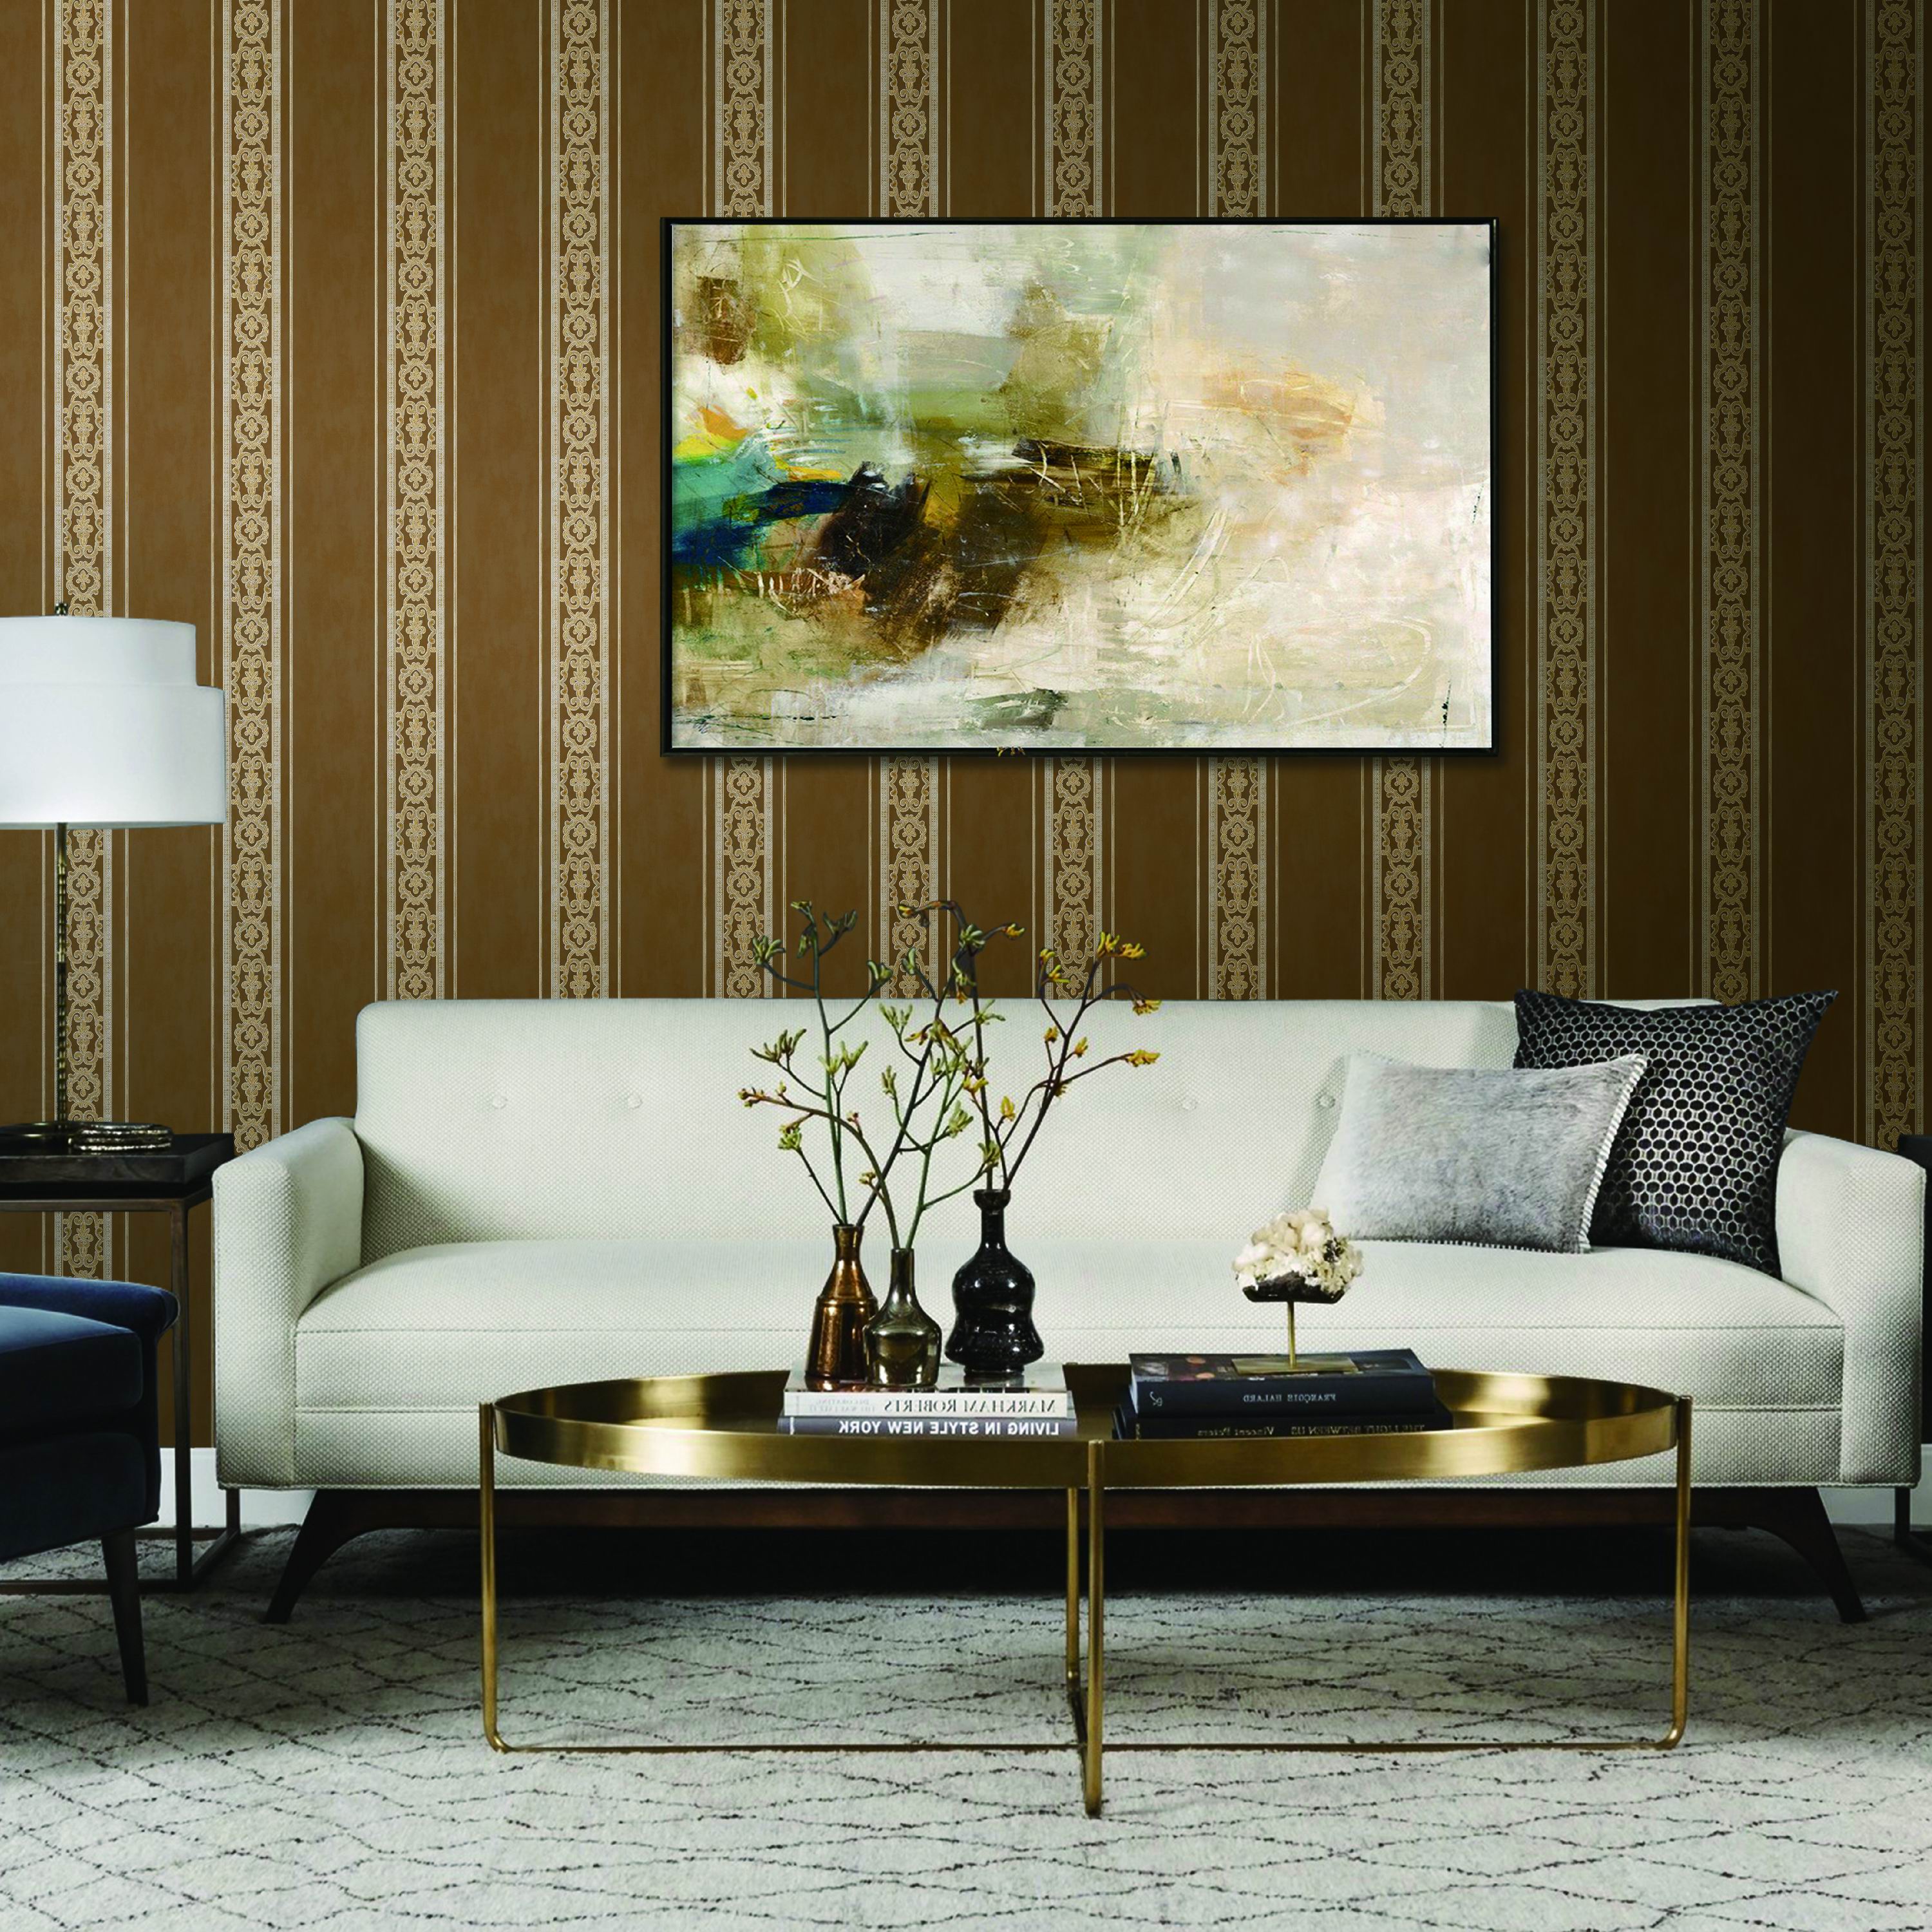 The Best Match Textile Effect PVC Wallpaper at Lowest Price 